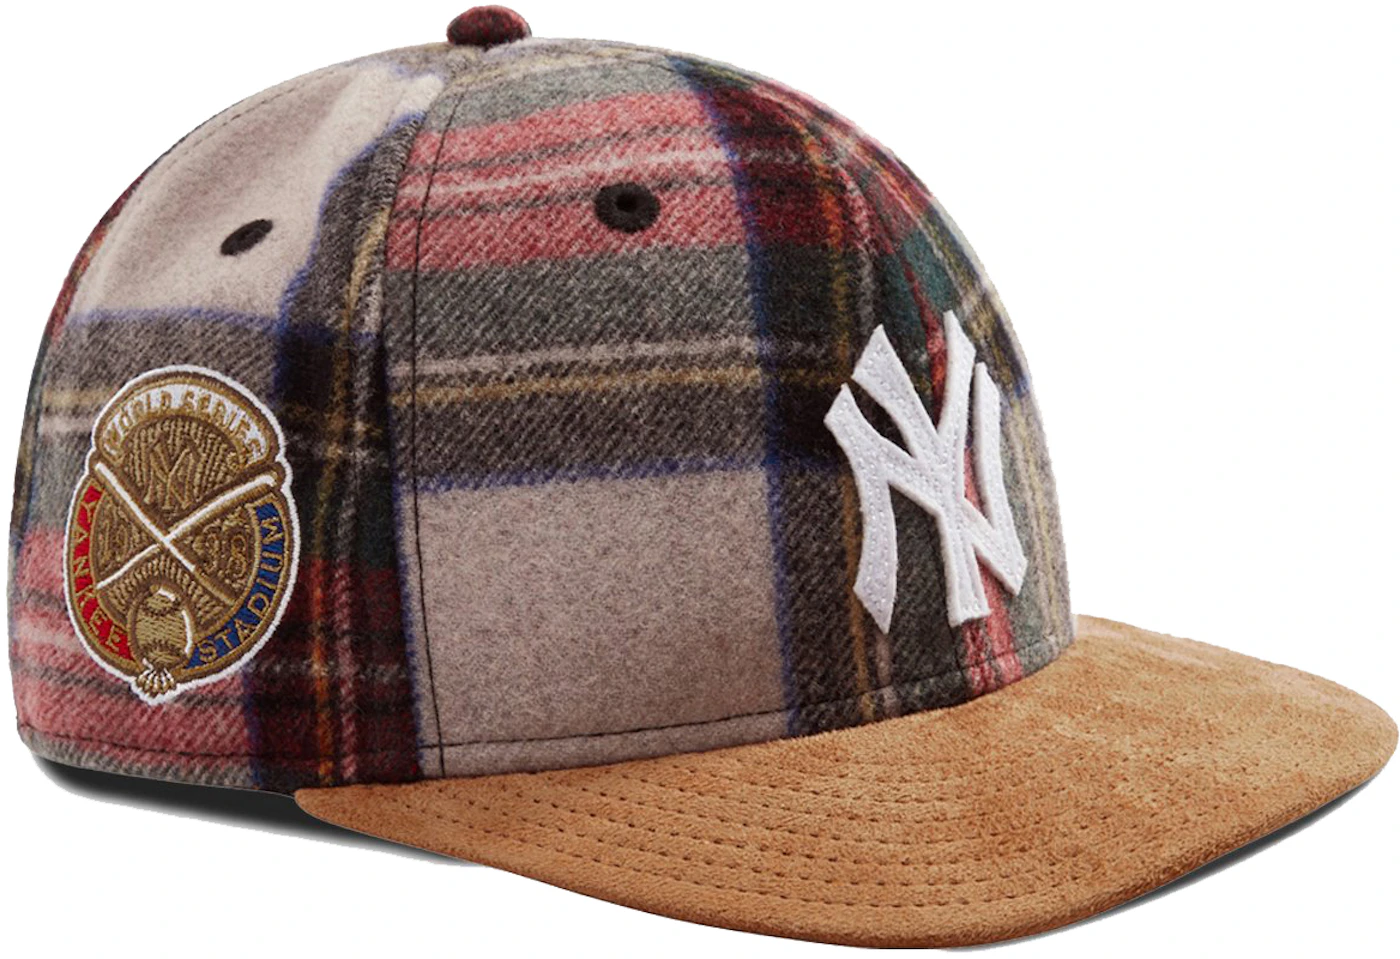 US - Fitted Hat for Men\'s Pyre Suede York - New Kith Yankees Plaid FW21 New Era